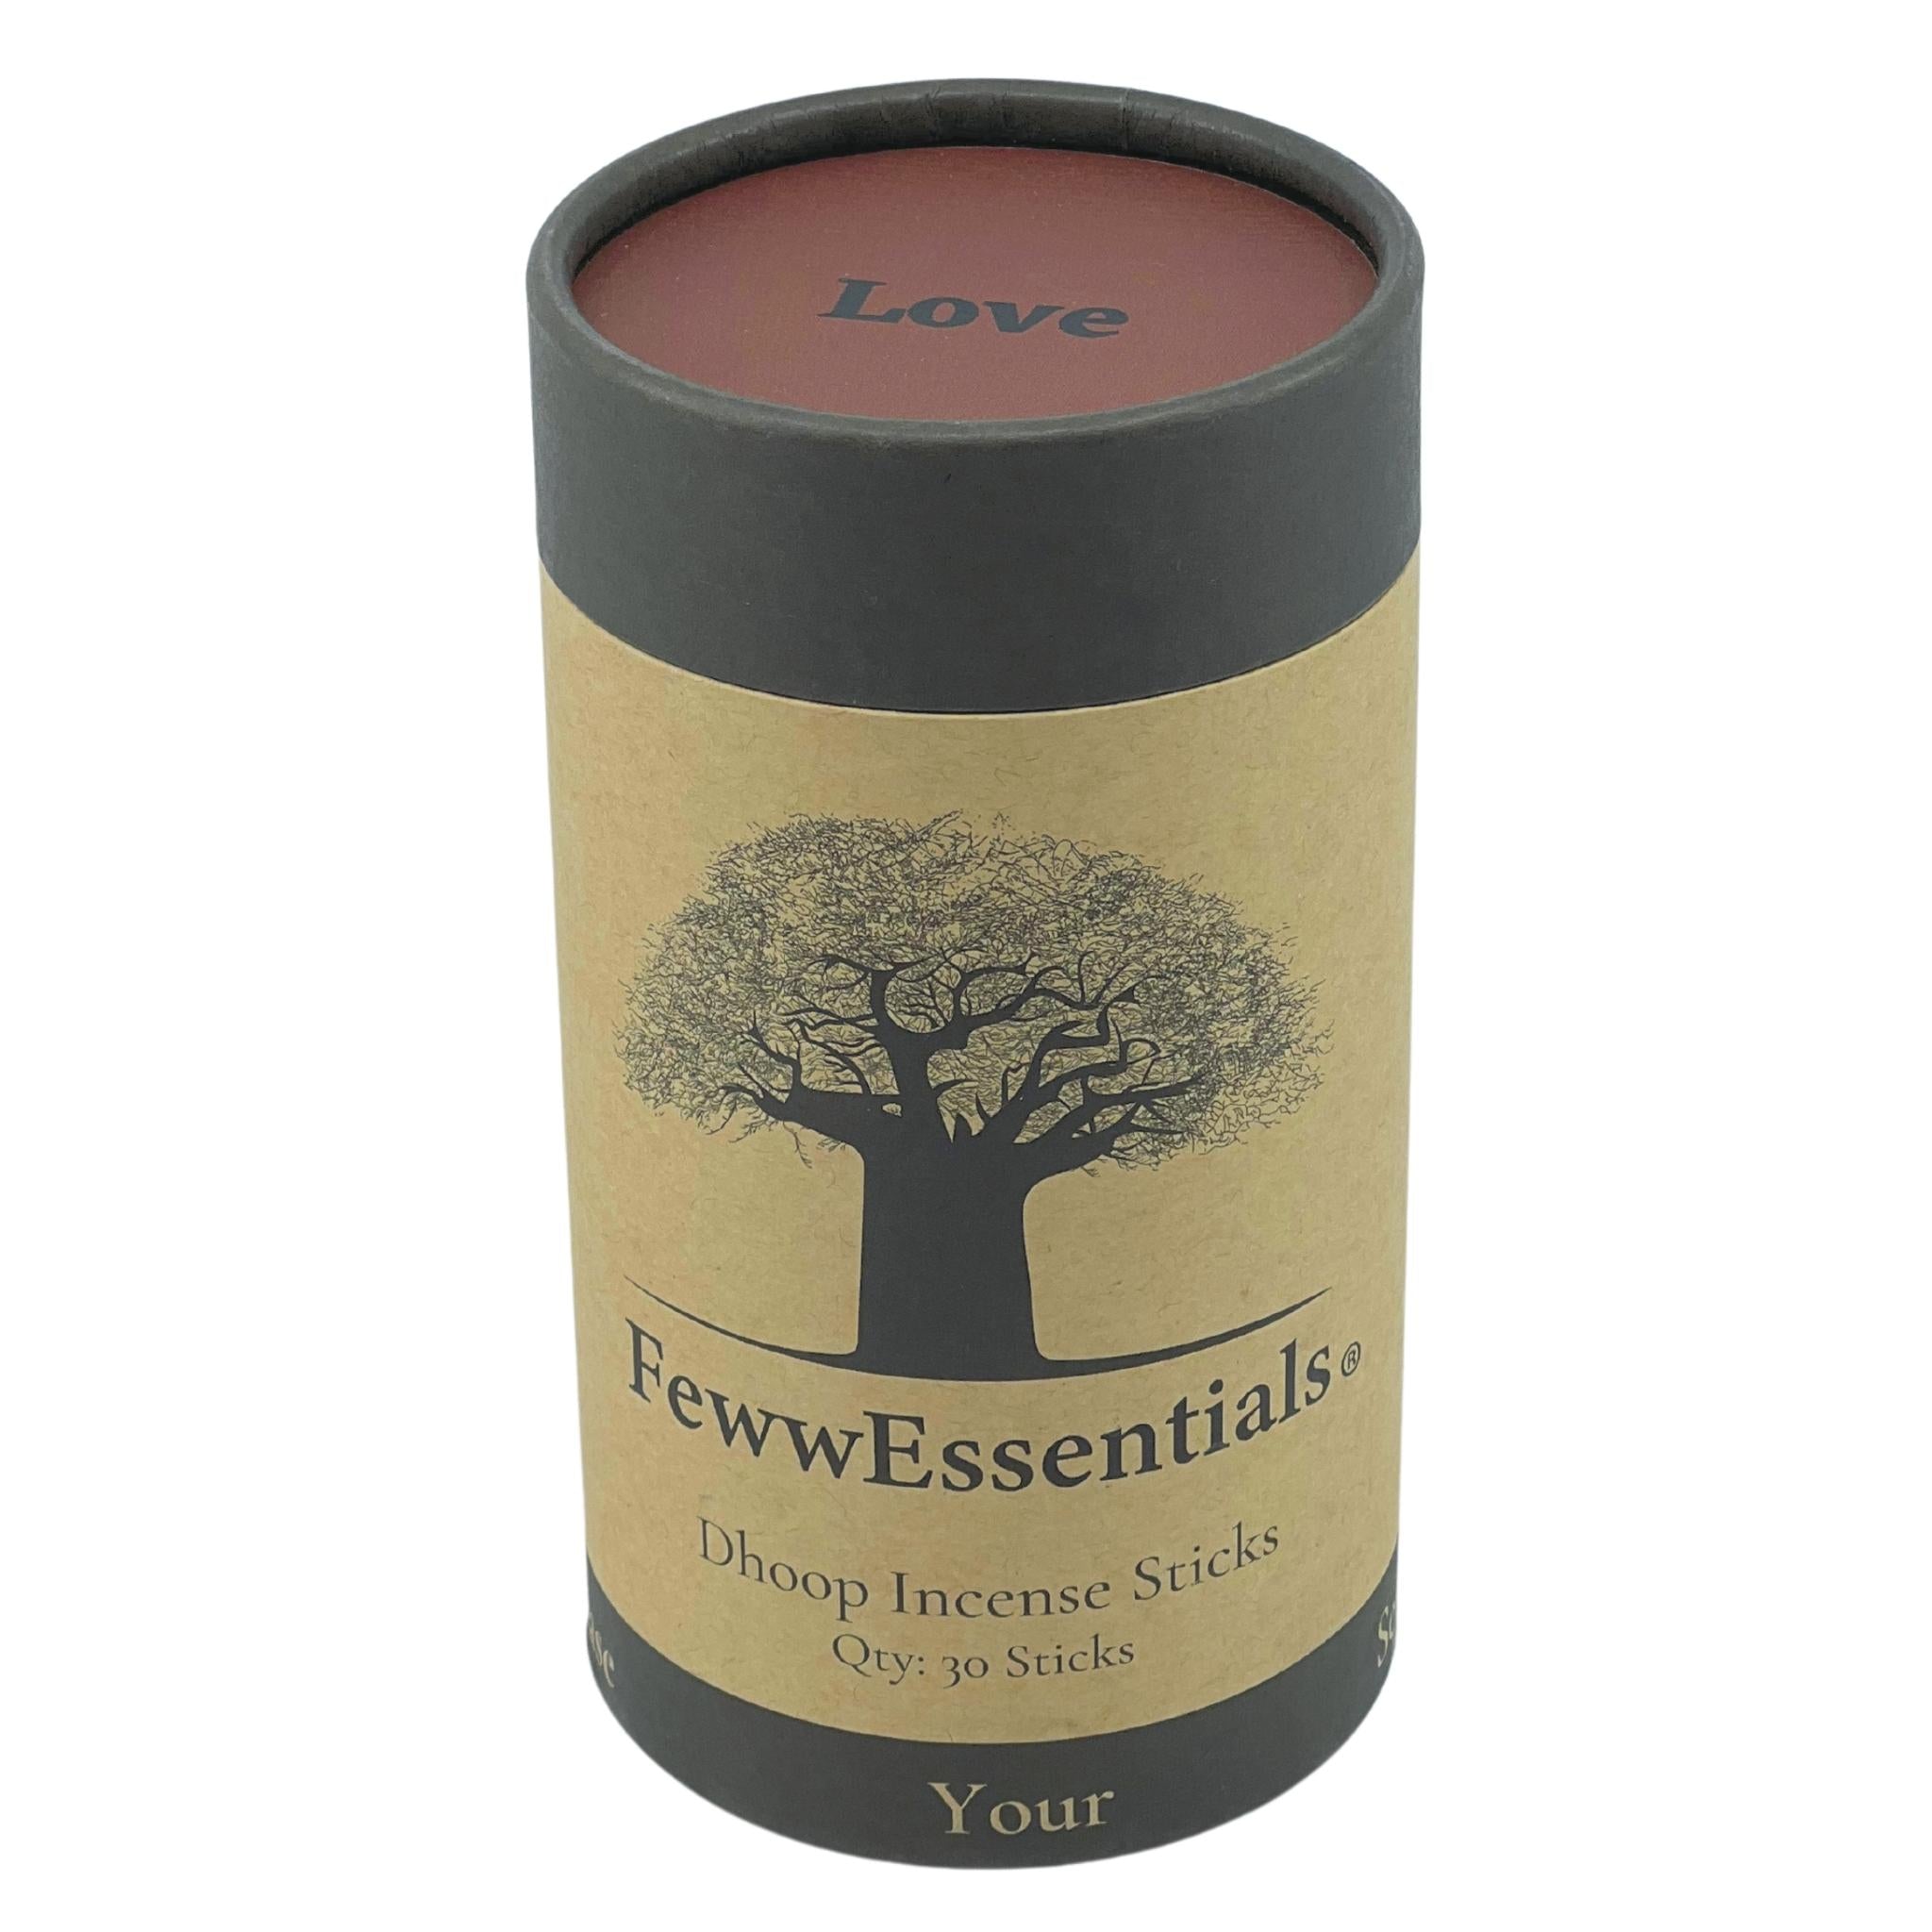 Image of FewwEssentials Dhoop Incense Sticks with the scent name Love in a Circular Kraft Brown Box with Maroon Lid